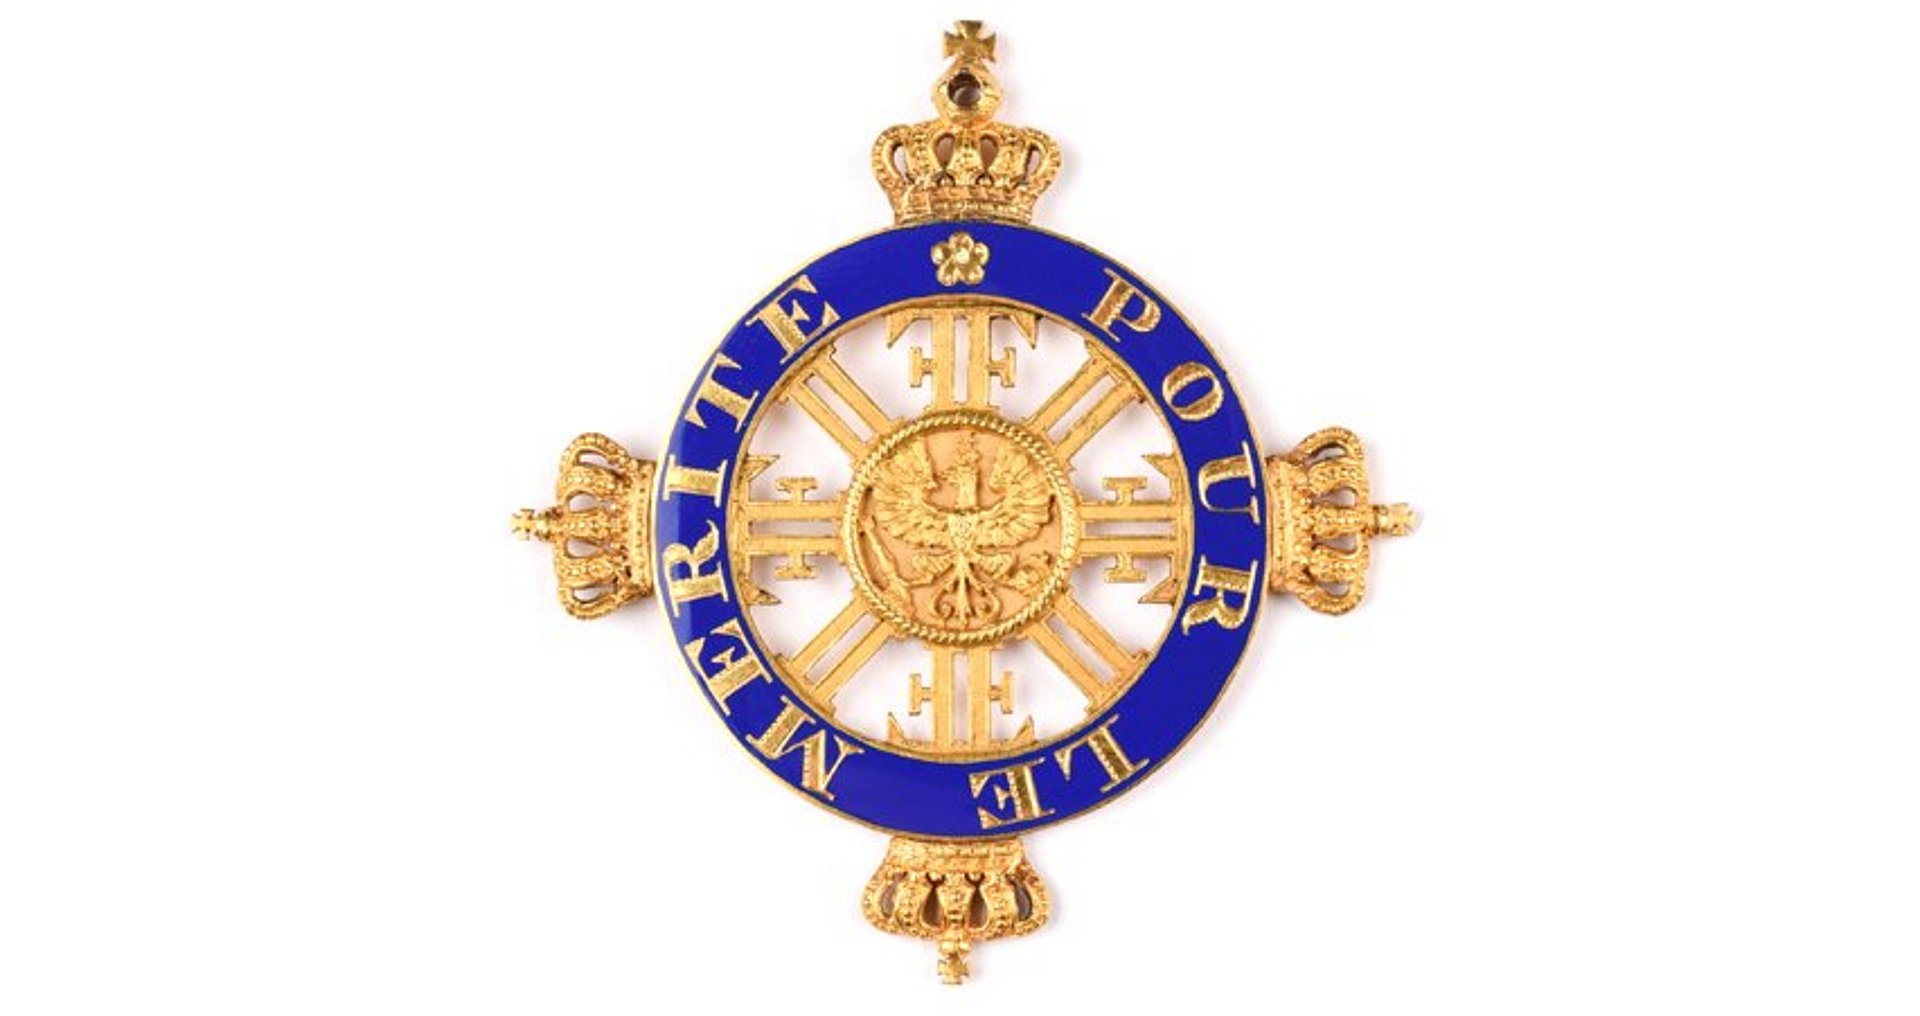 The members of the Pour le mérite wear the symbol of the order. 